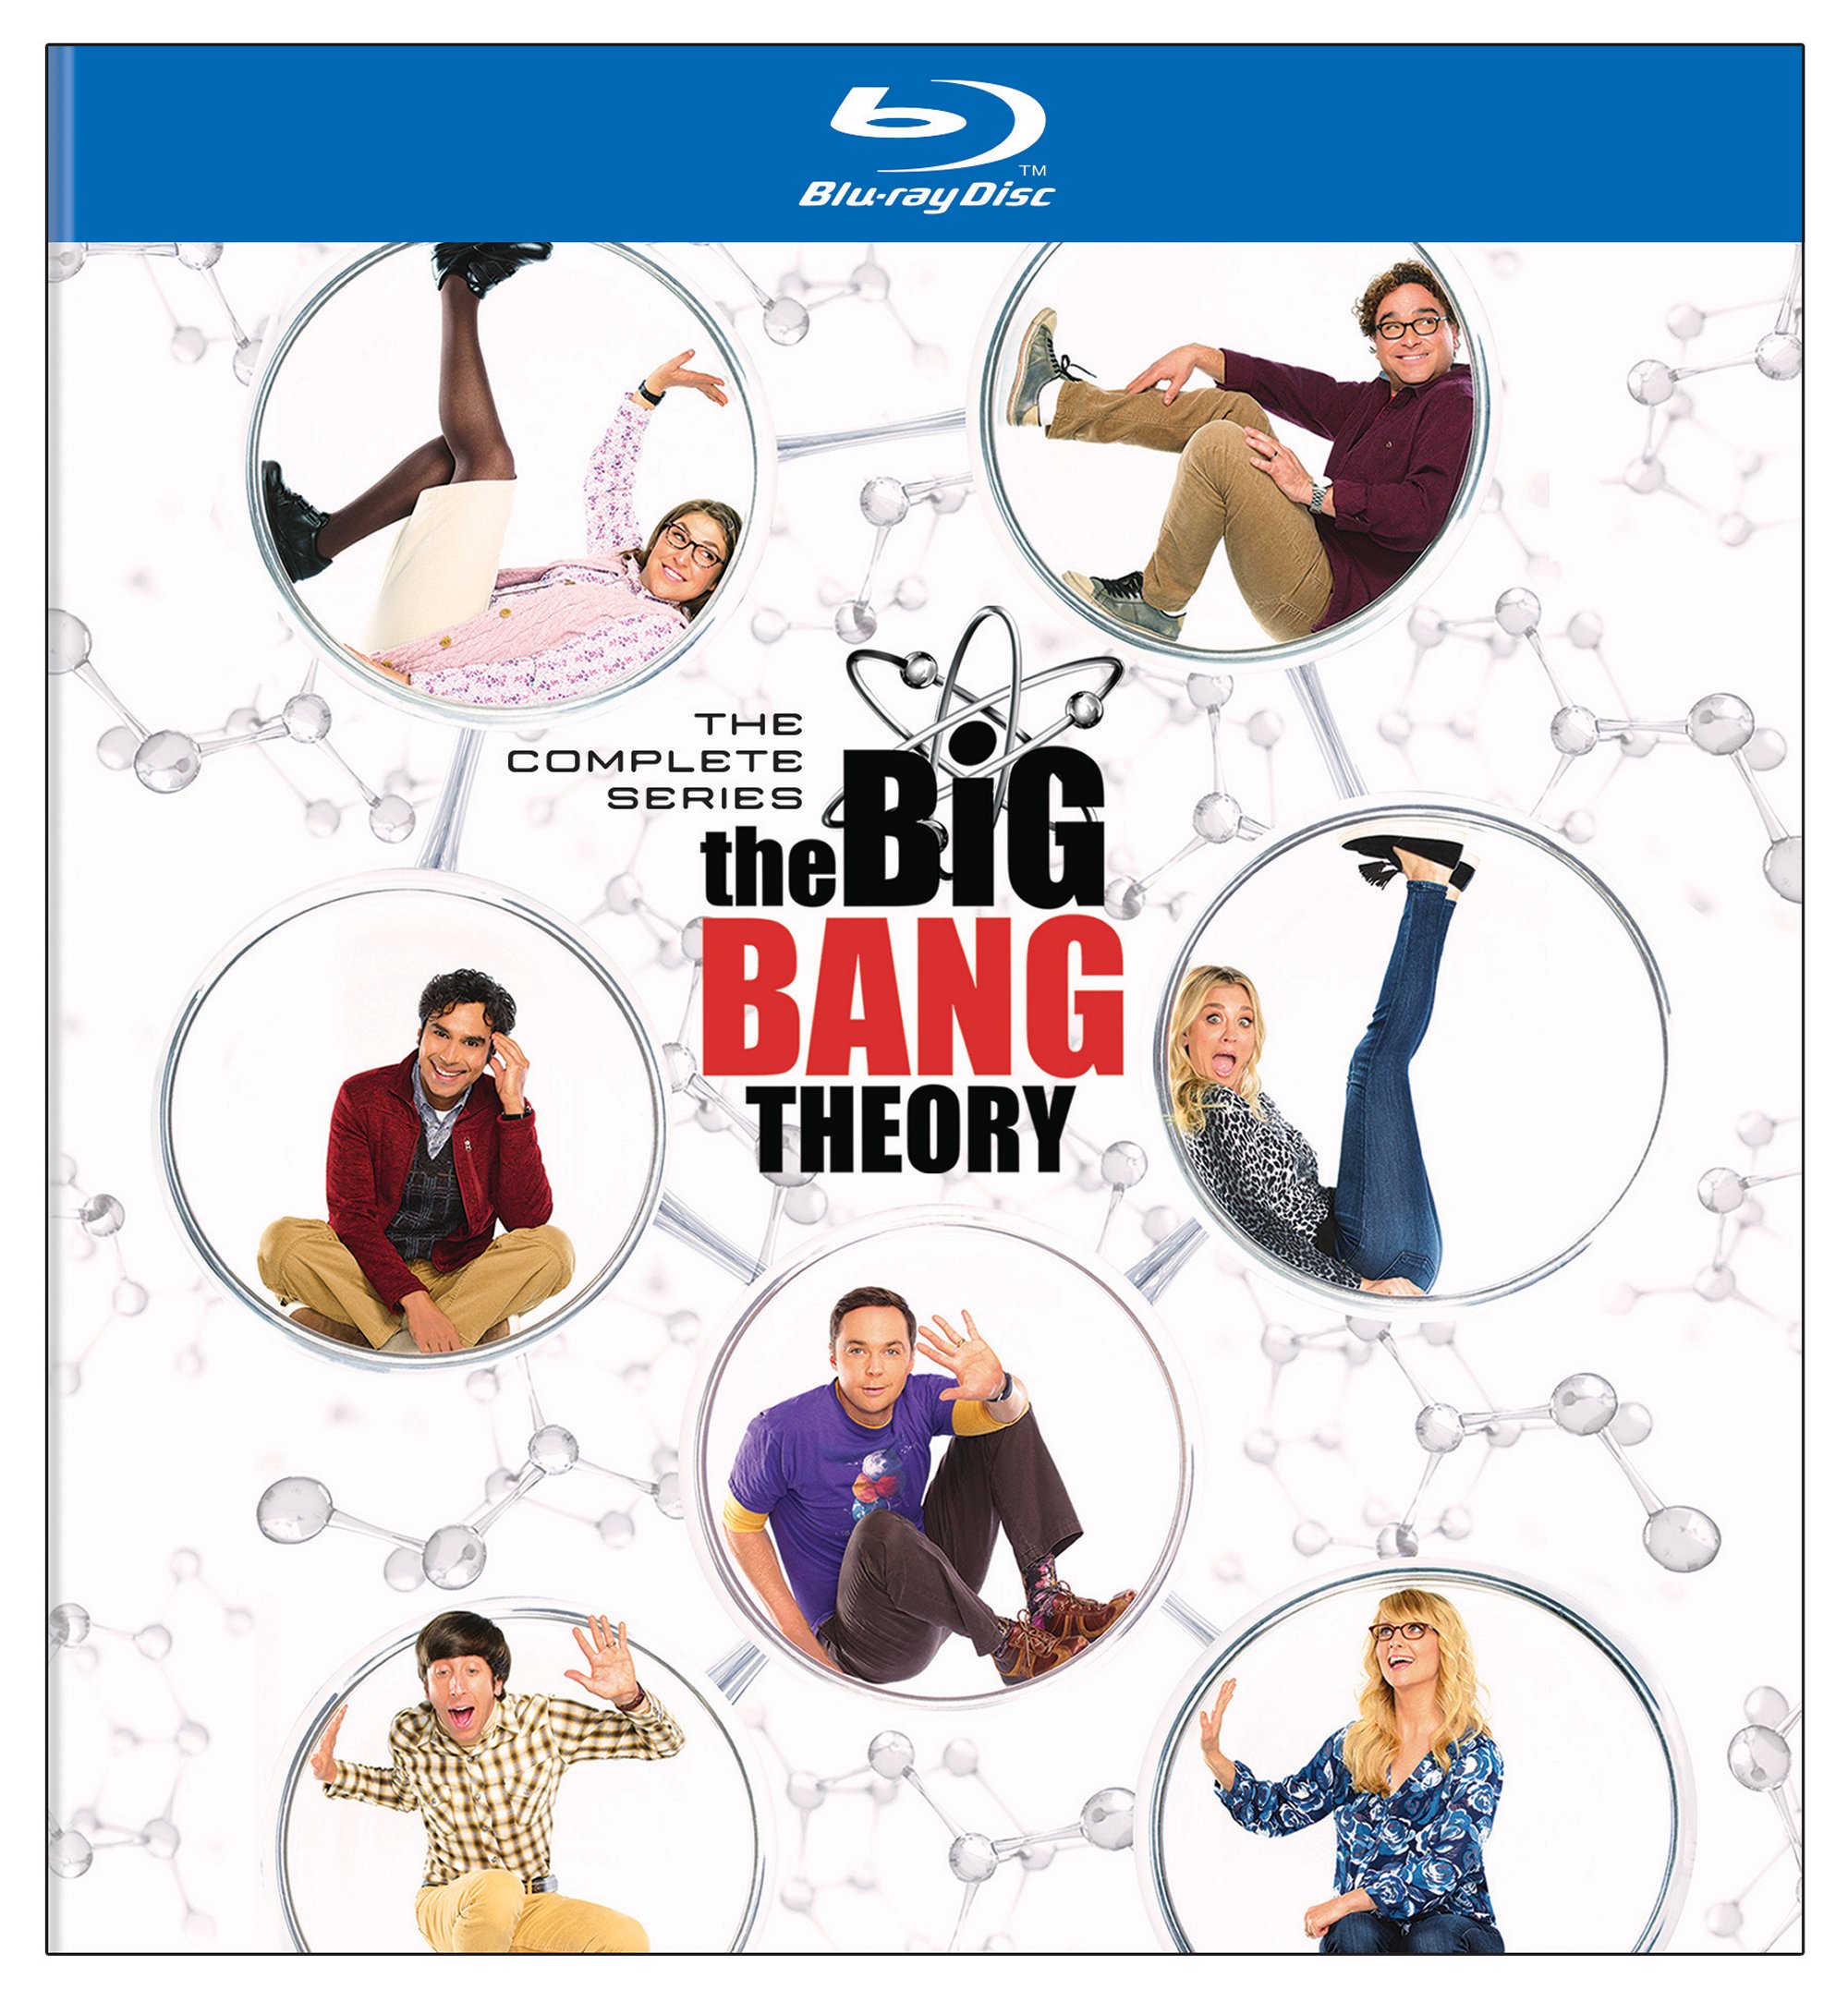 The Big Bang Theory: The Complete Series (Box Set) - Blu-ray [ 2019 ]  - Comedy Television On Blu-ray - TV Shows On GRUV